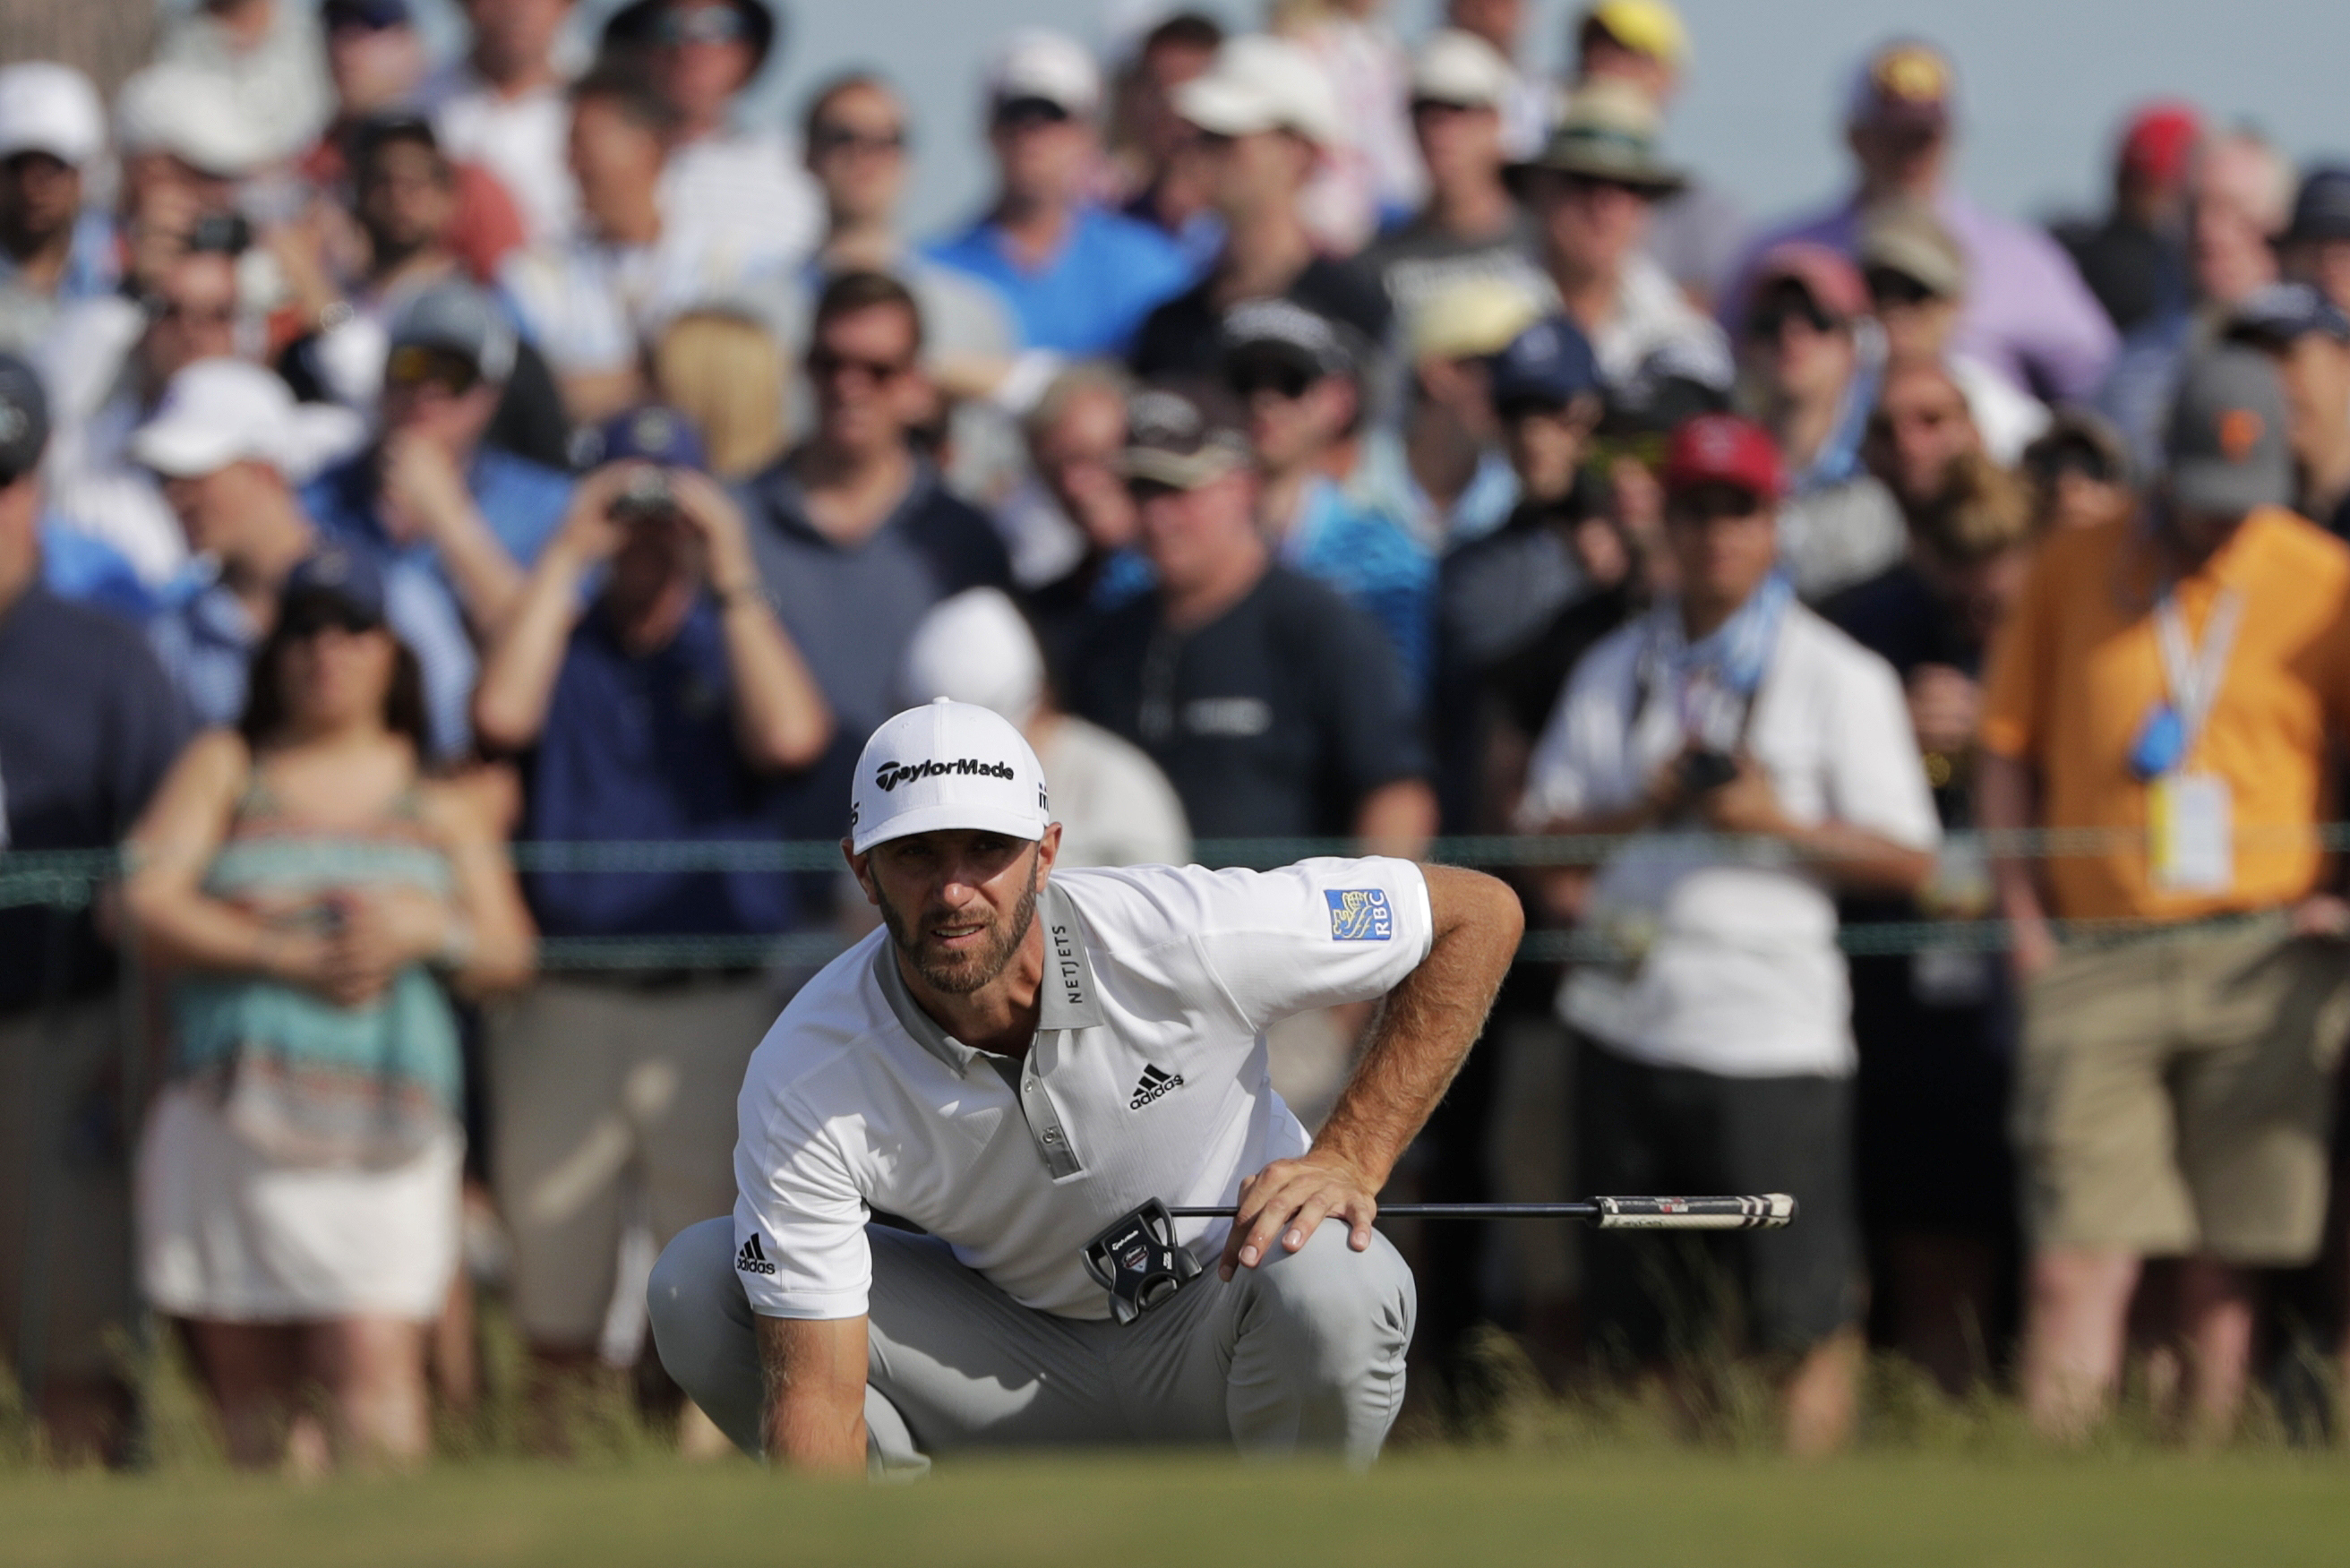 Us Open Golf Prize Money 2018 Final Leaderboard Total Purse And Payouts Bleacher Report Latest News Videos And Highlights